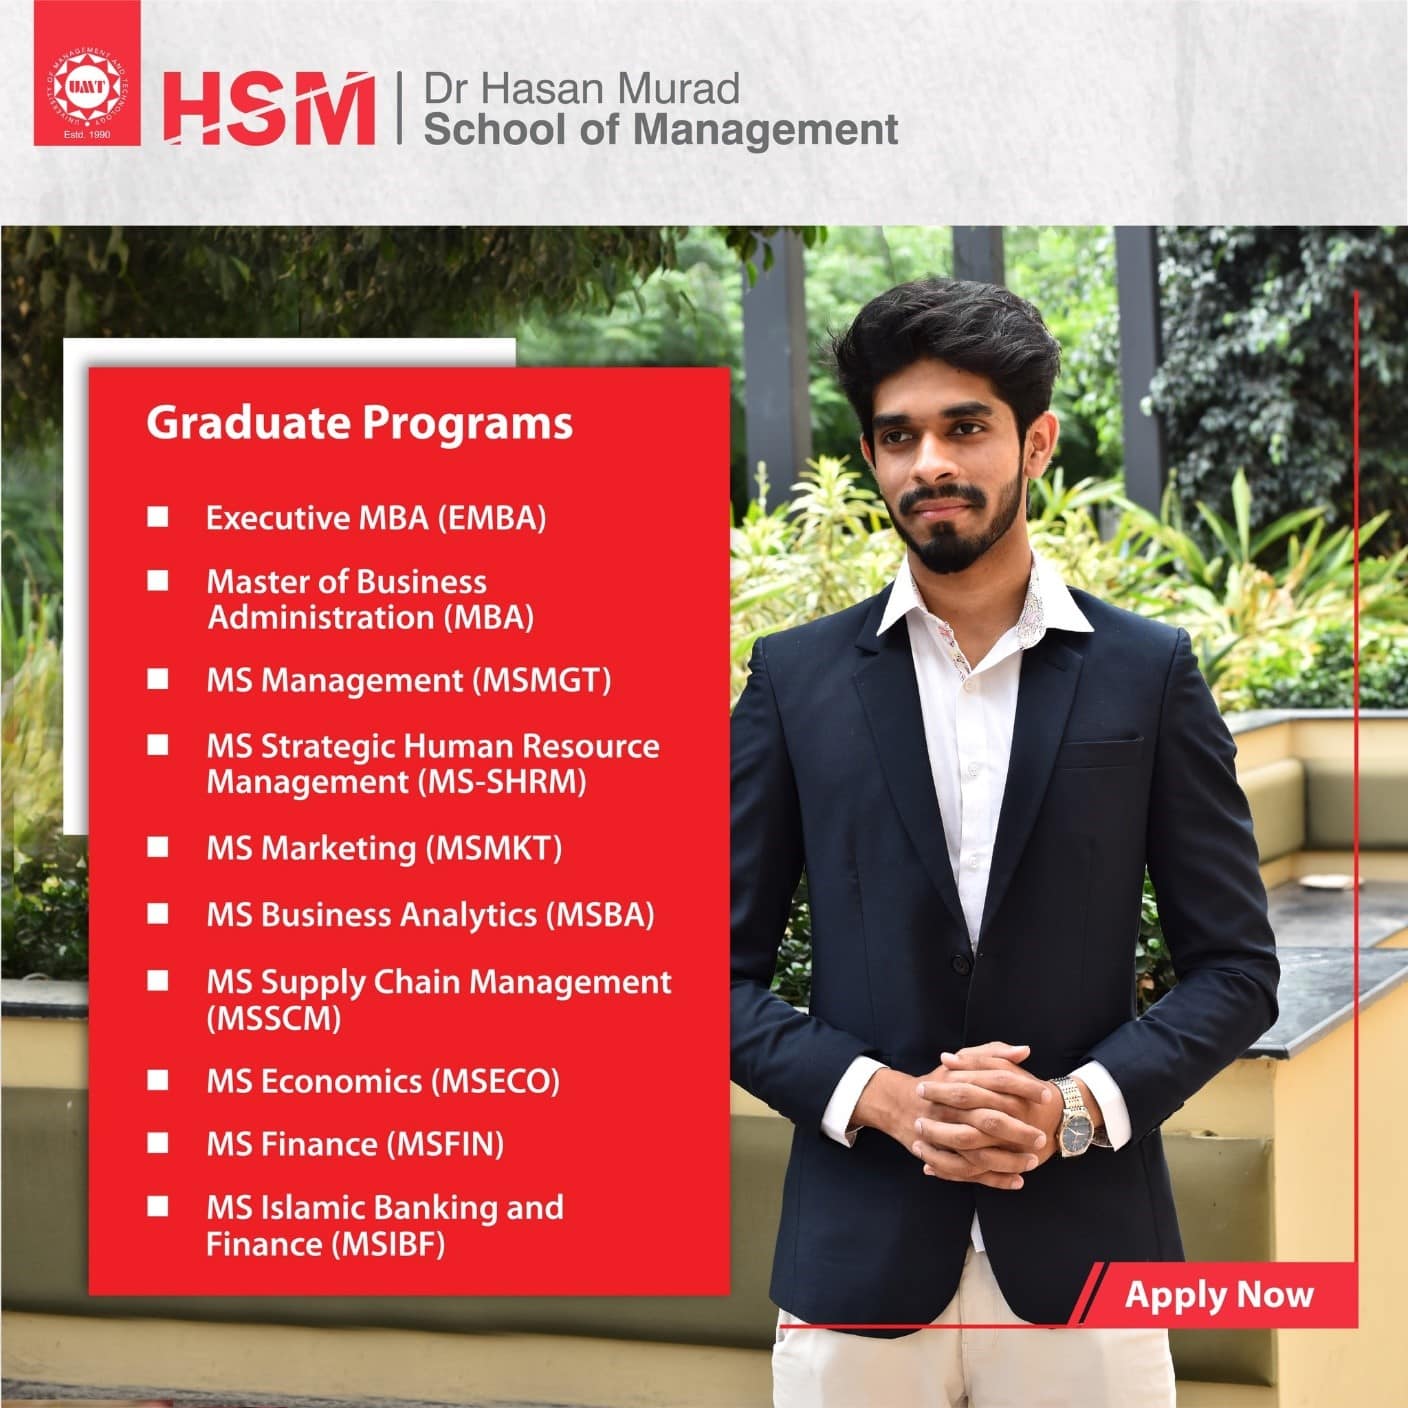 Admissions Dates Announced for Fall 2023 at HSM-UMT